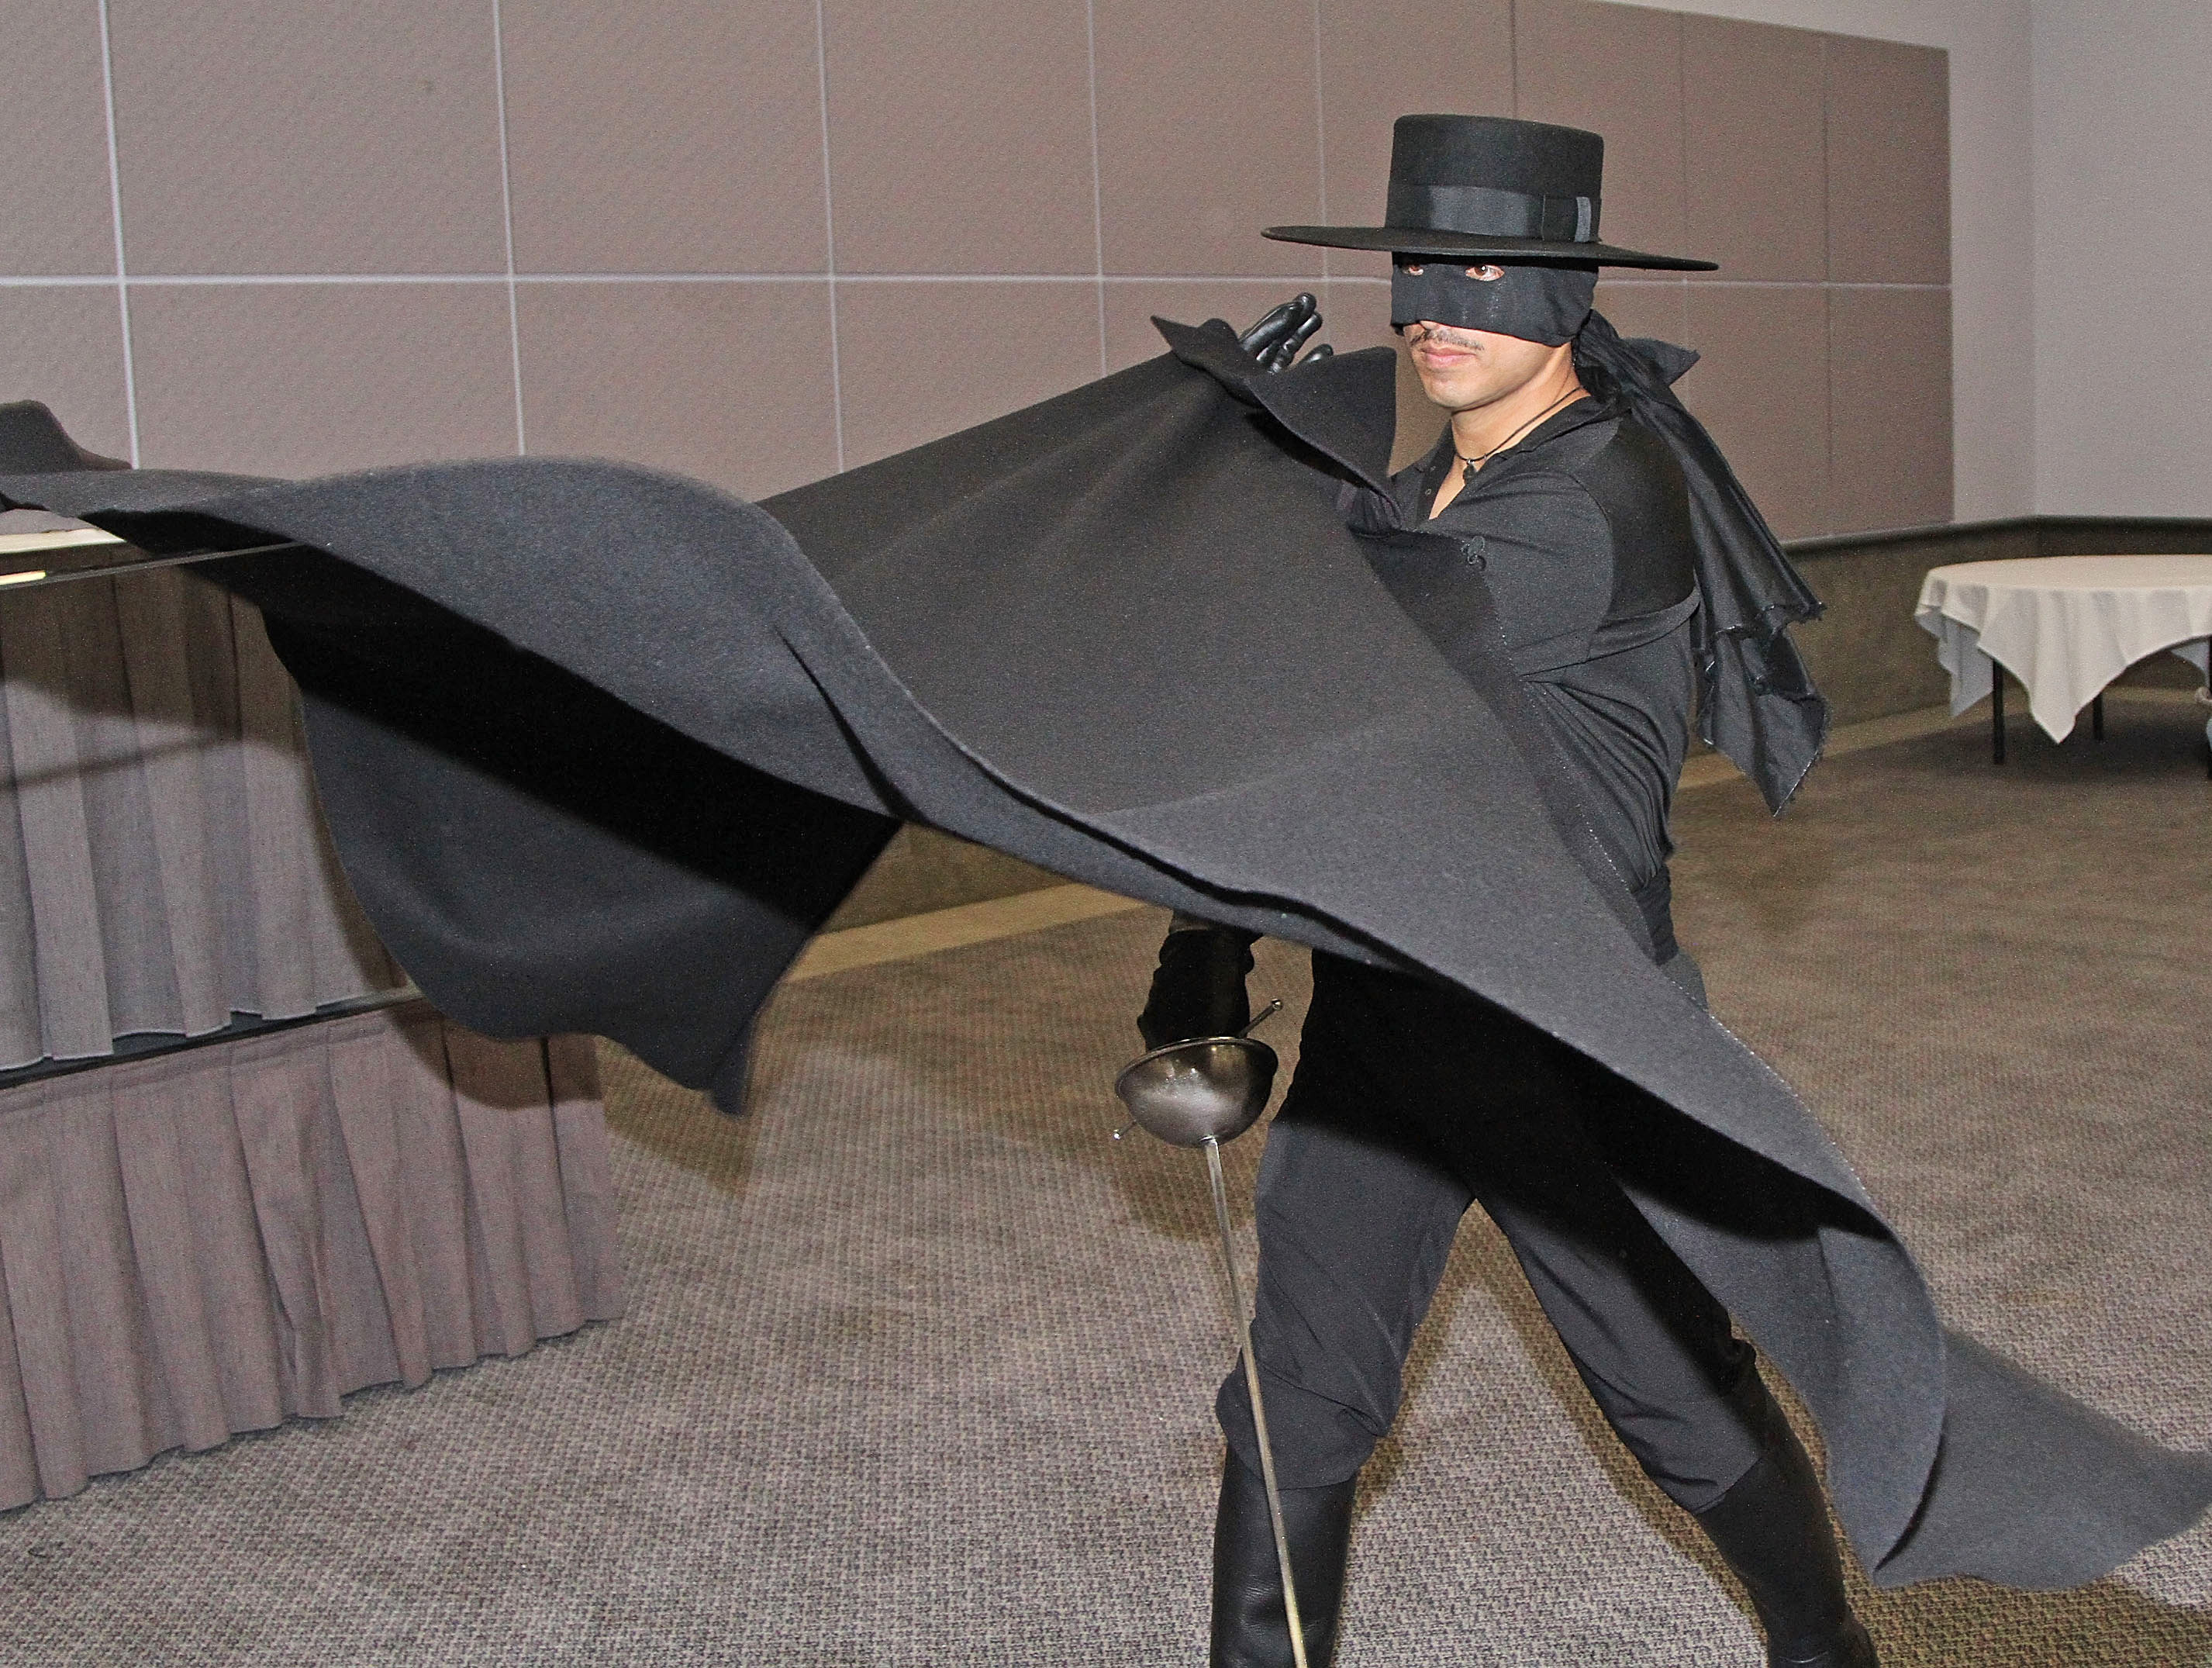 Alex Kruz performs at The Return of Zorro at the Los Angeles Convention Center on October 23, 2015 in Los Angeles, California.